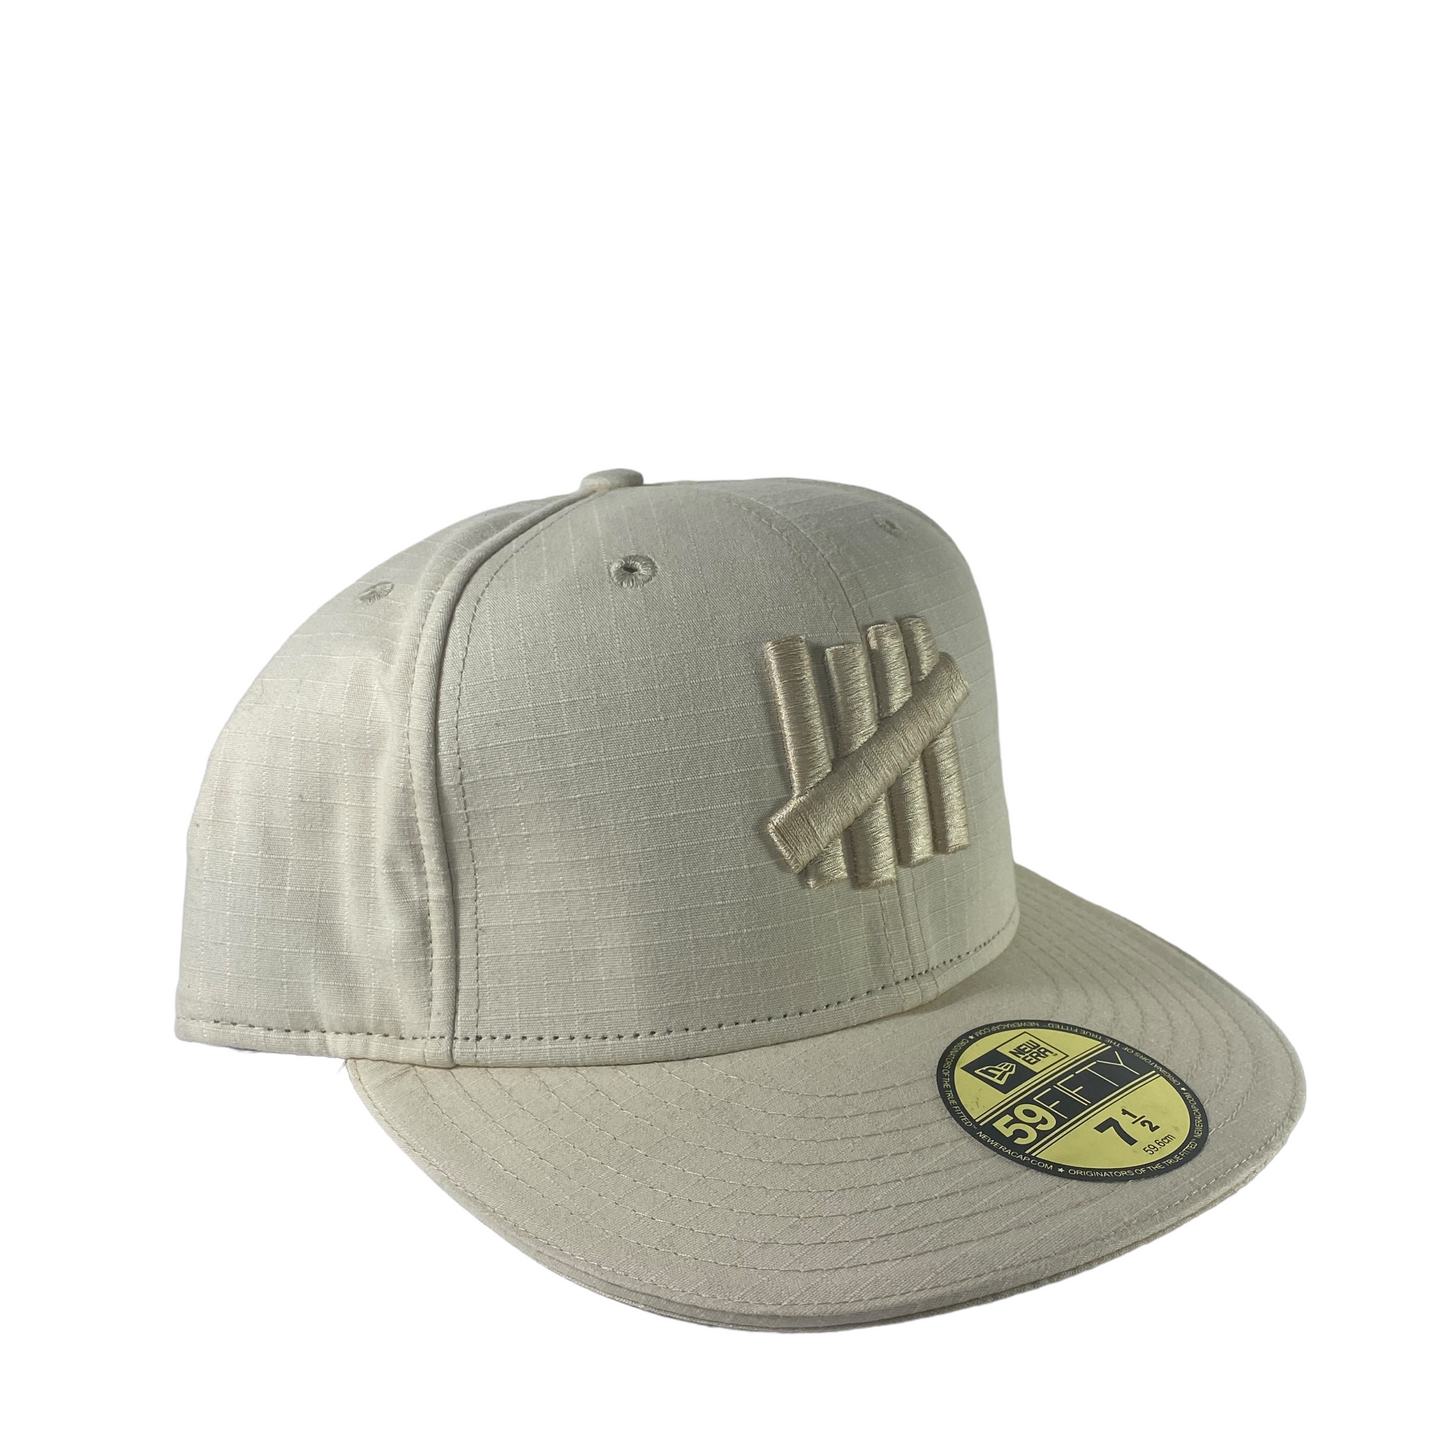 New Era x UNDFTD Tan Fitted Size 7 1/2